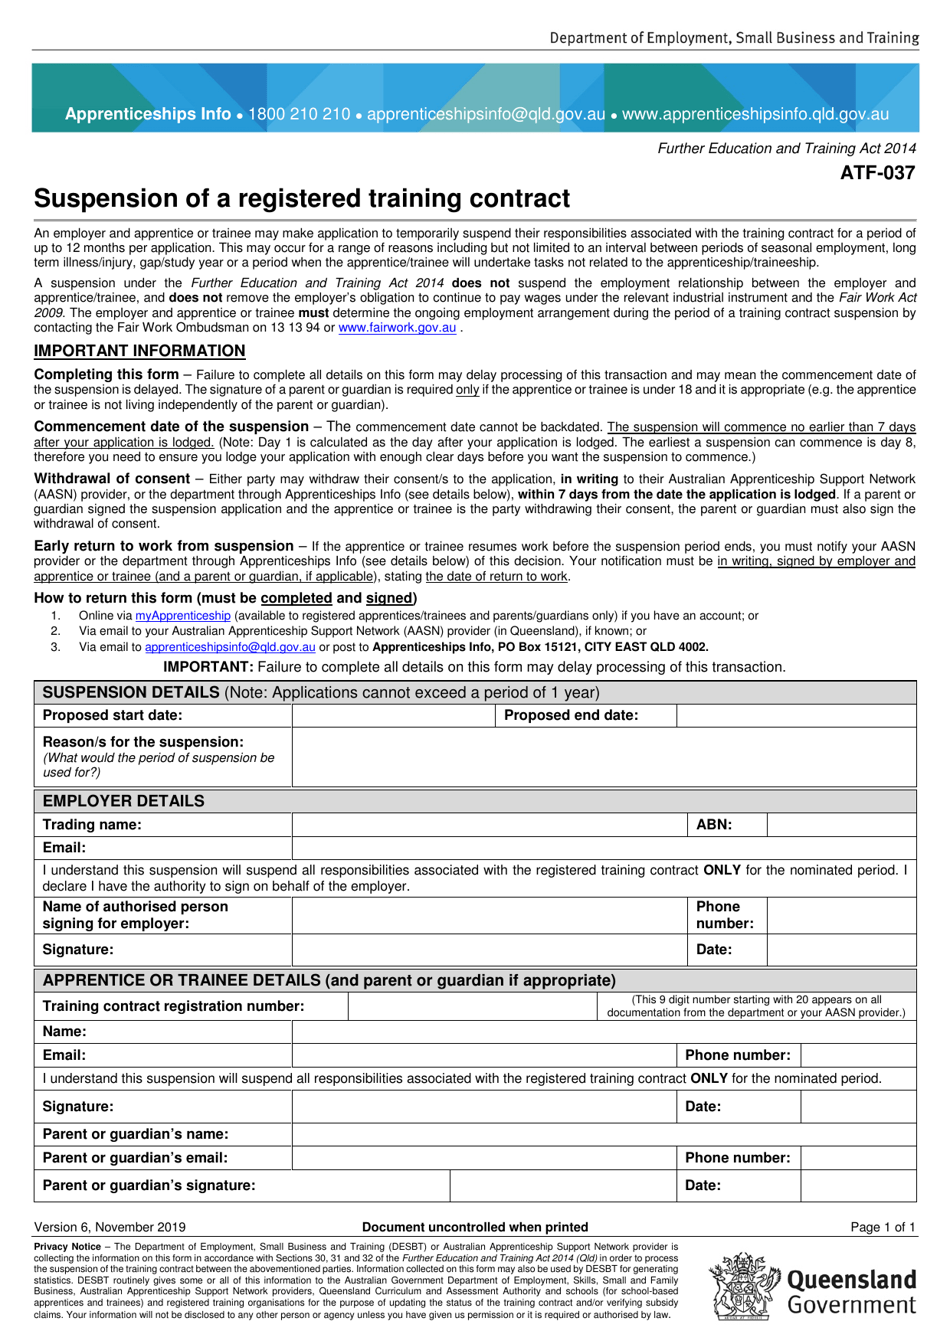 Form ATF-037 Suspension of a Registered Training Contract - Queensland, Australia, Page 1